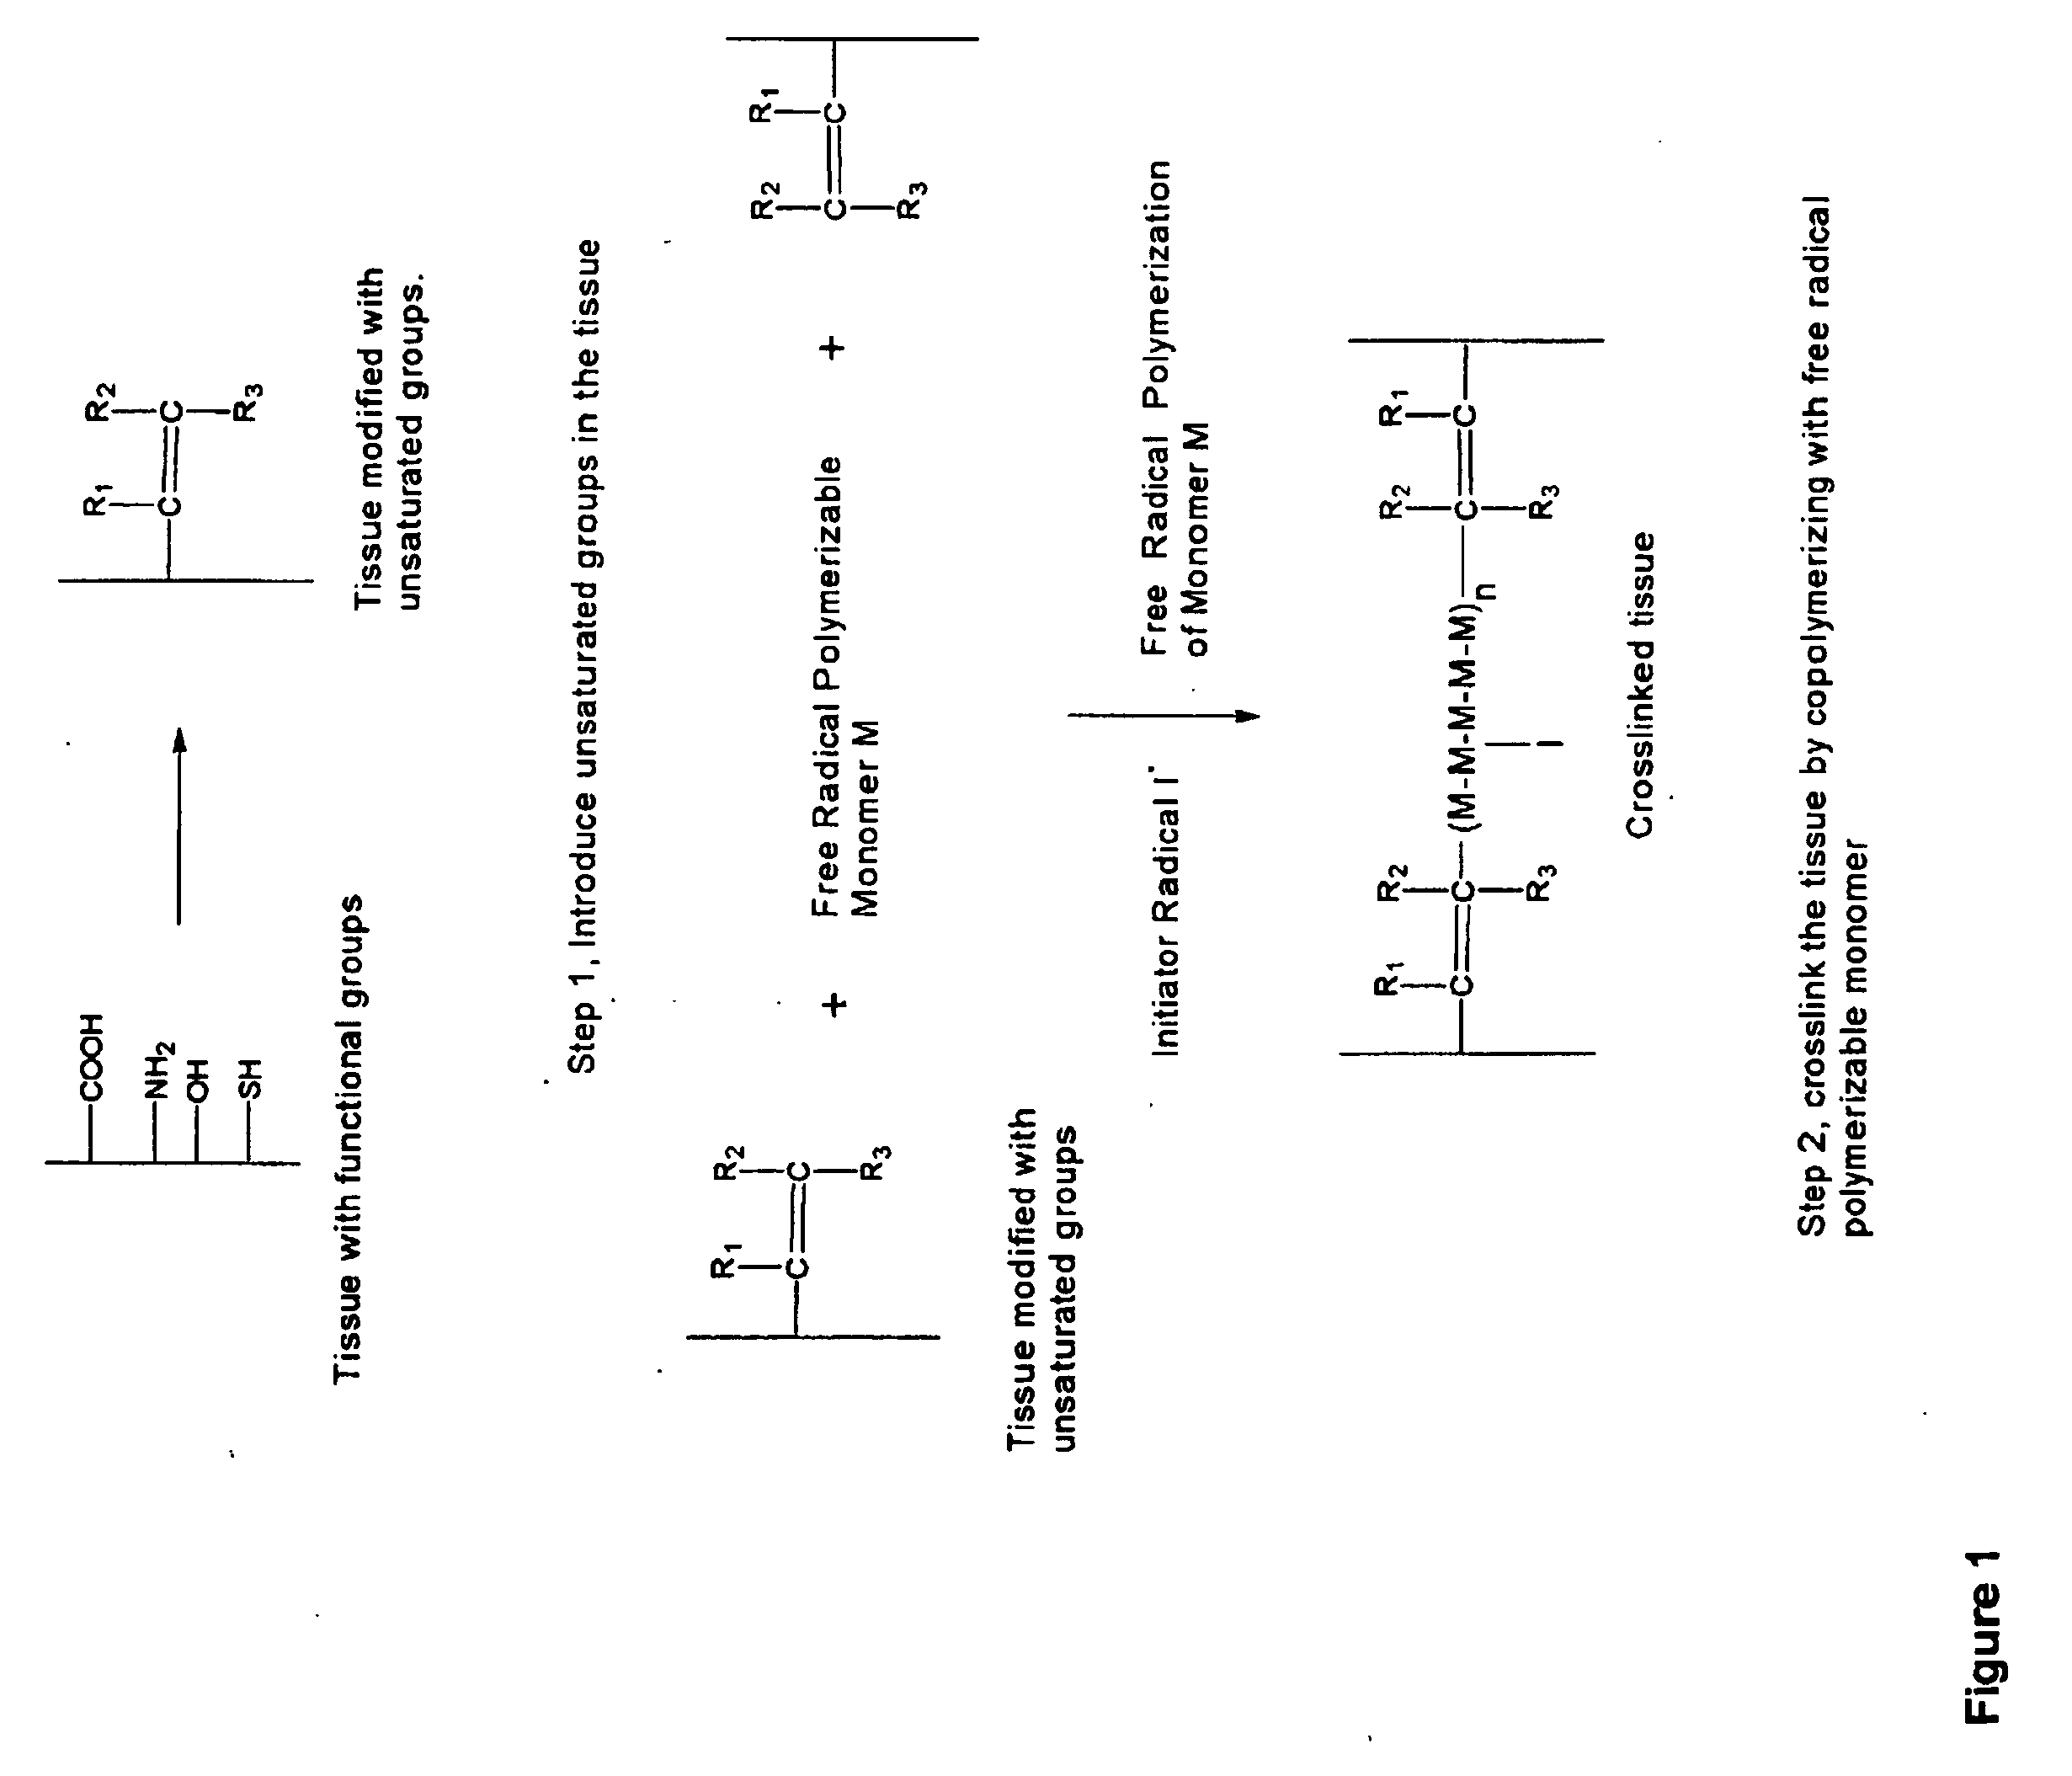 Implantable tissue compositions and method